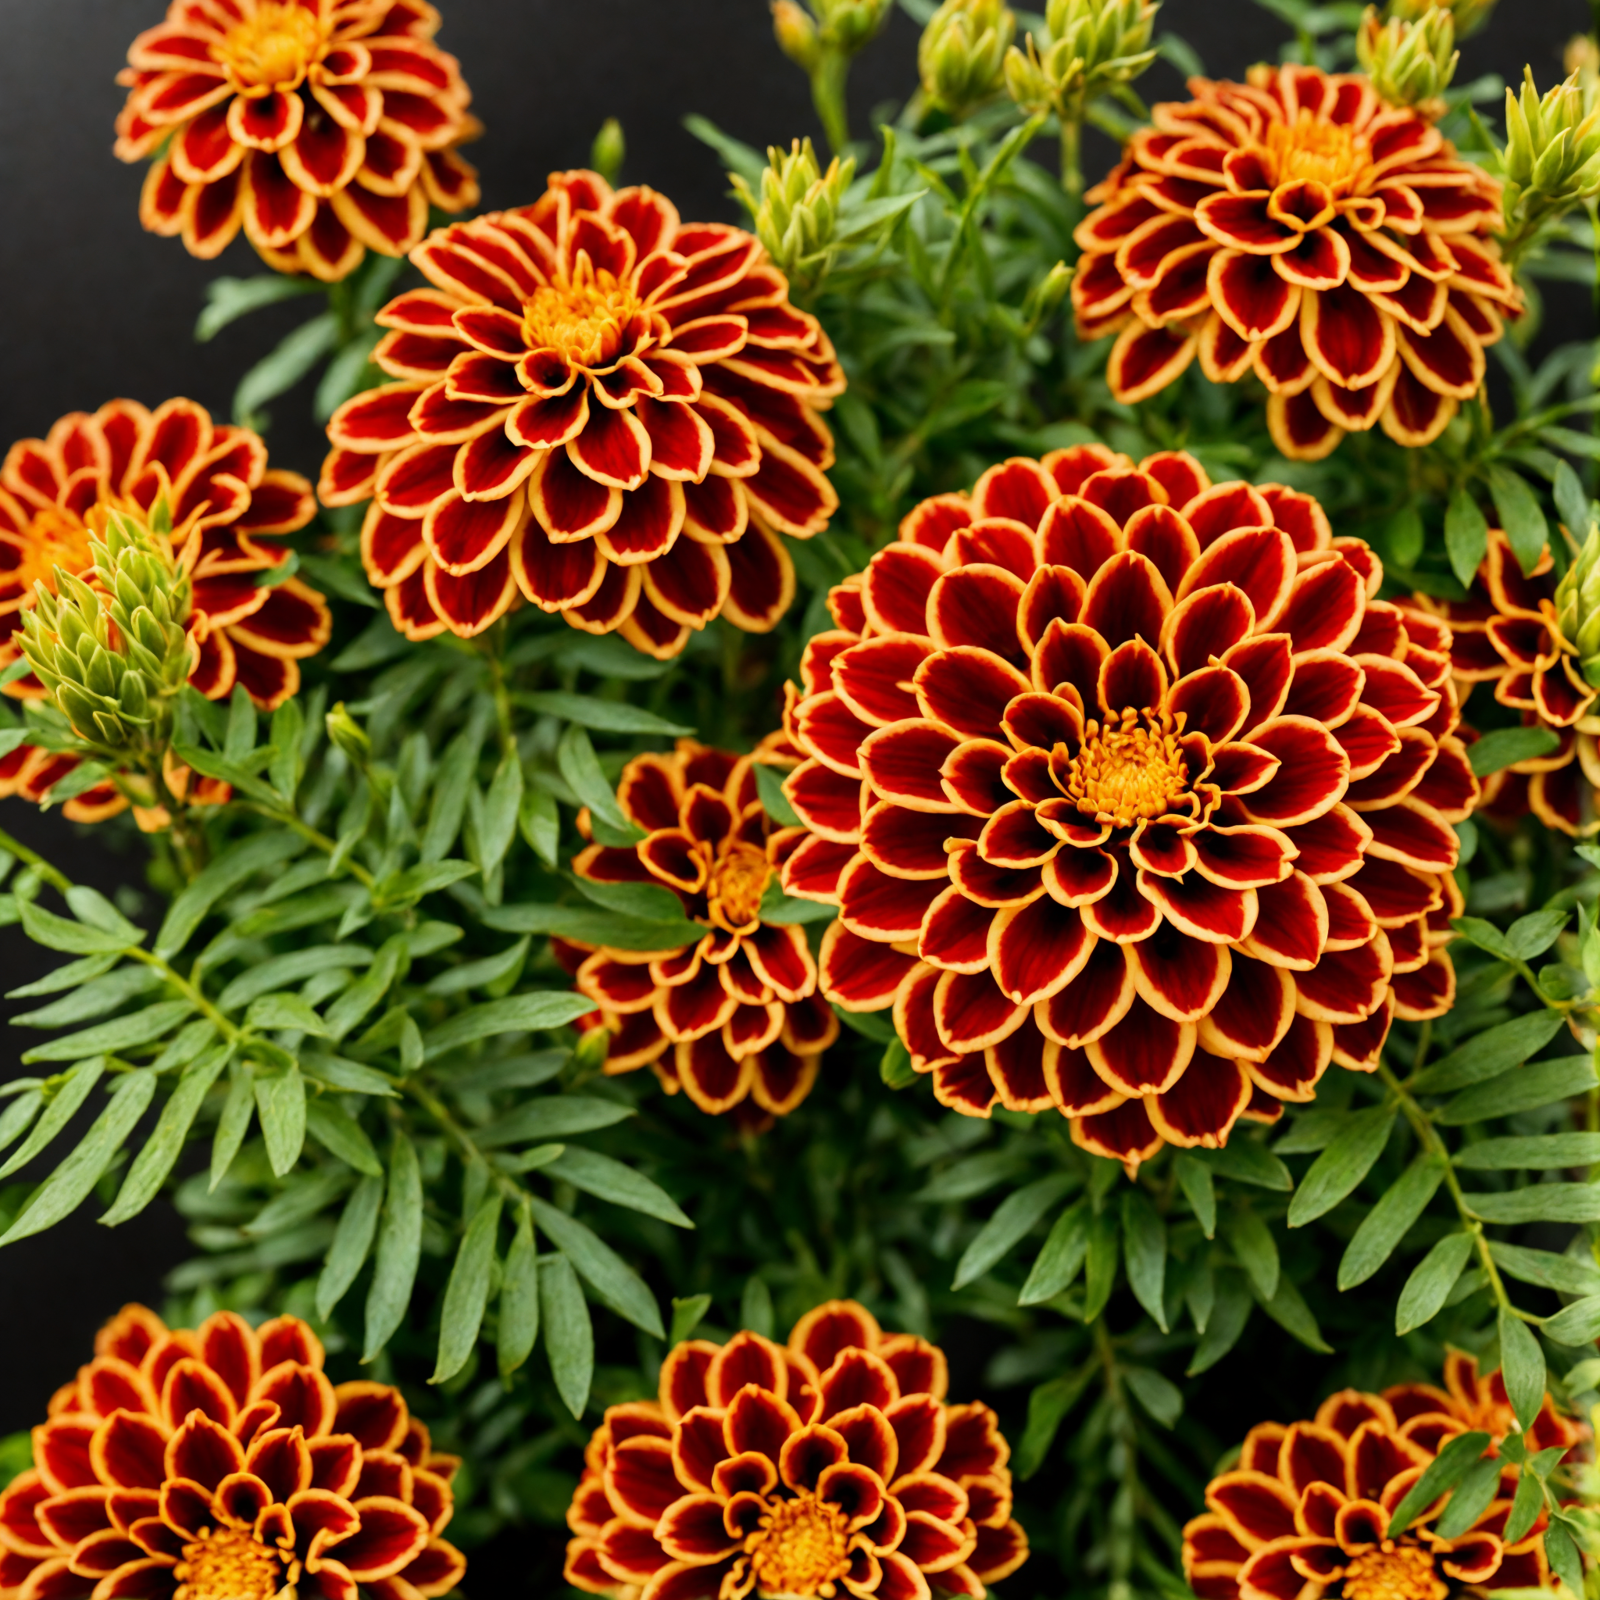 A cluster of vibrant red and yellow Tagetes erecta flowers in a planter, with clear lighting and a dark background.